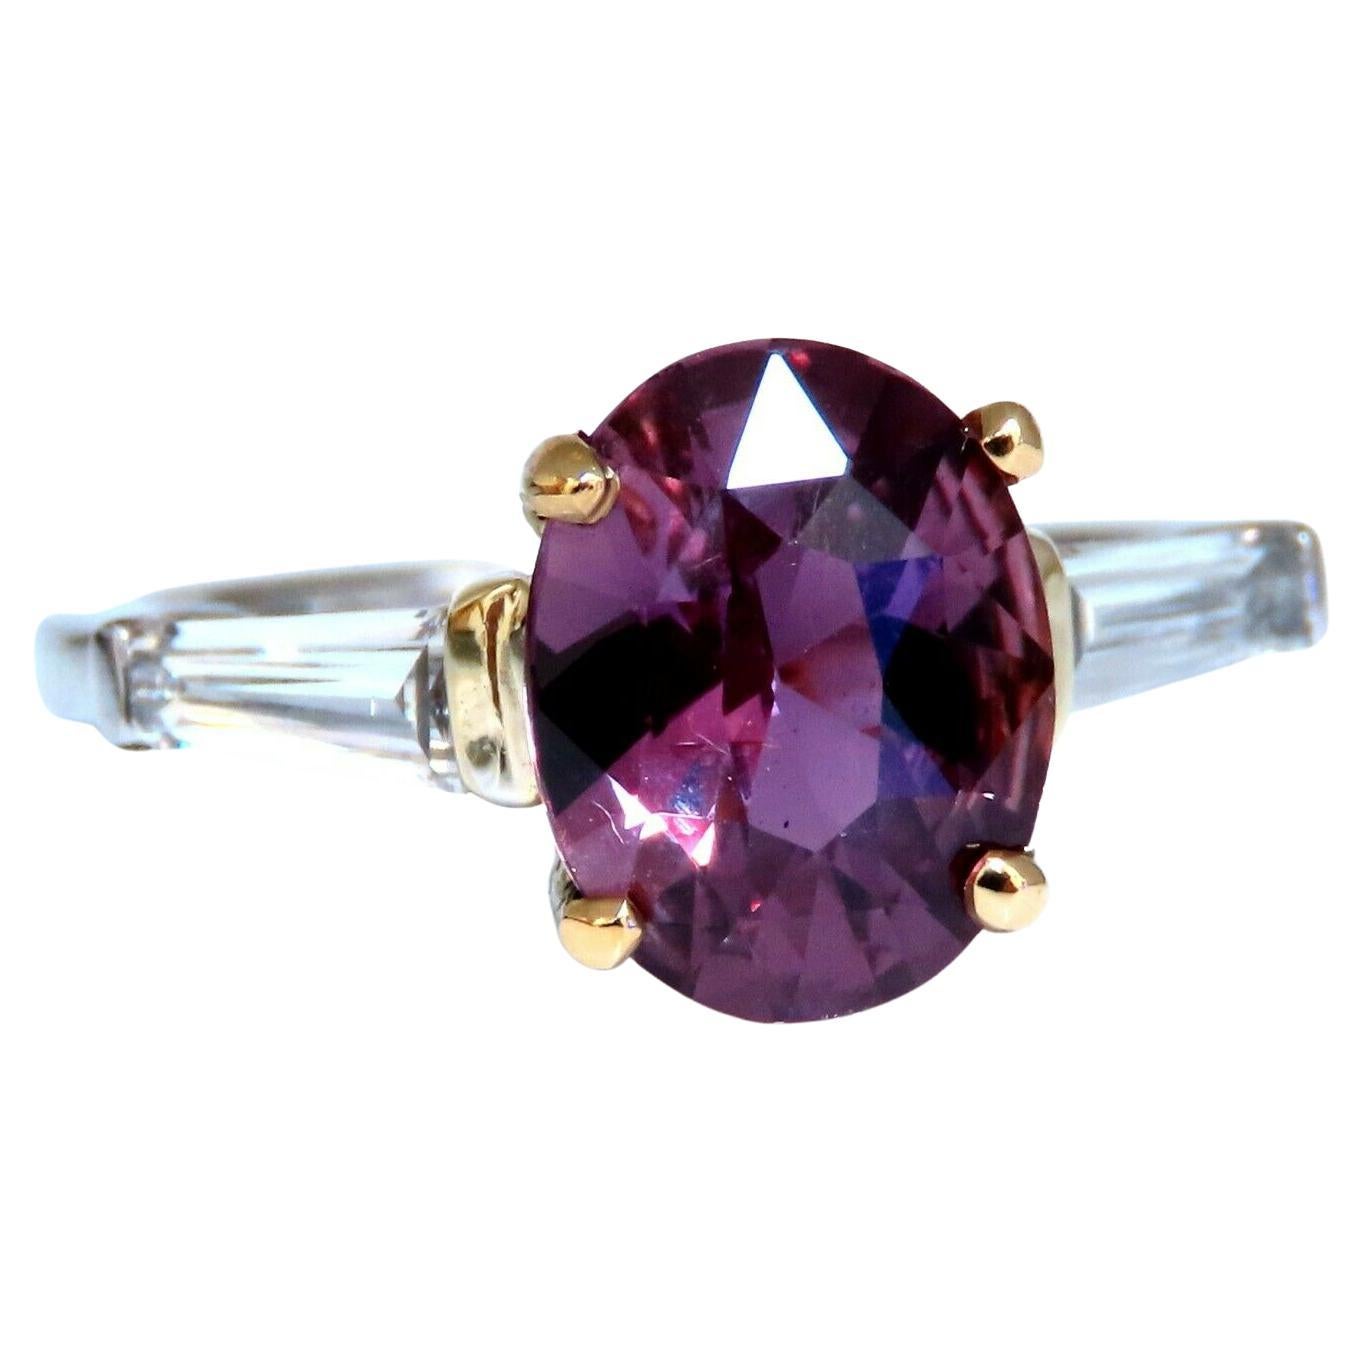 GIA Certified 2.47ct Natural Purple Pink Sapphire Diamonds Ring 18kt